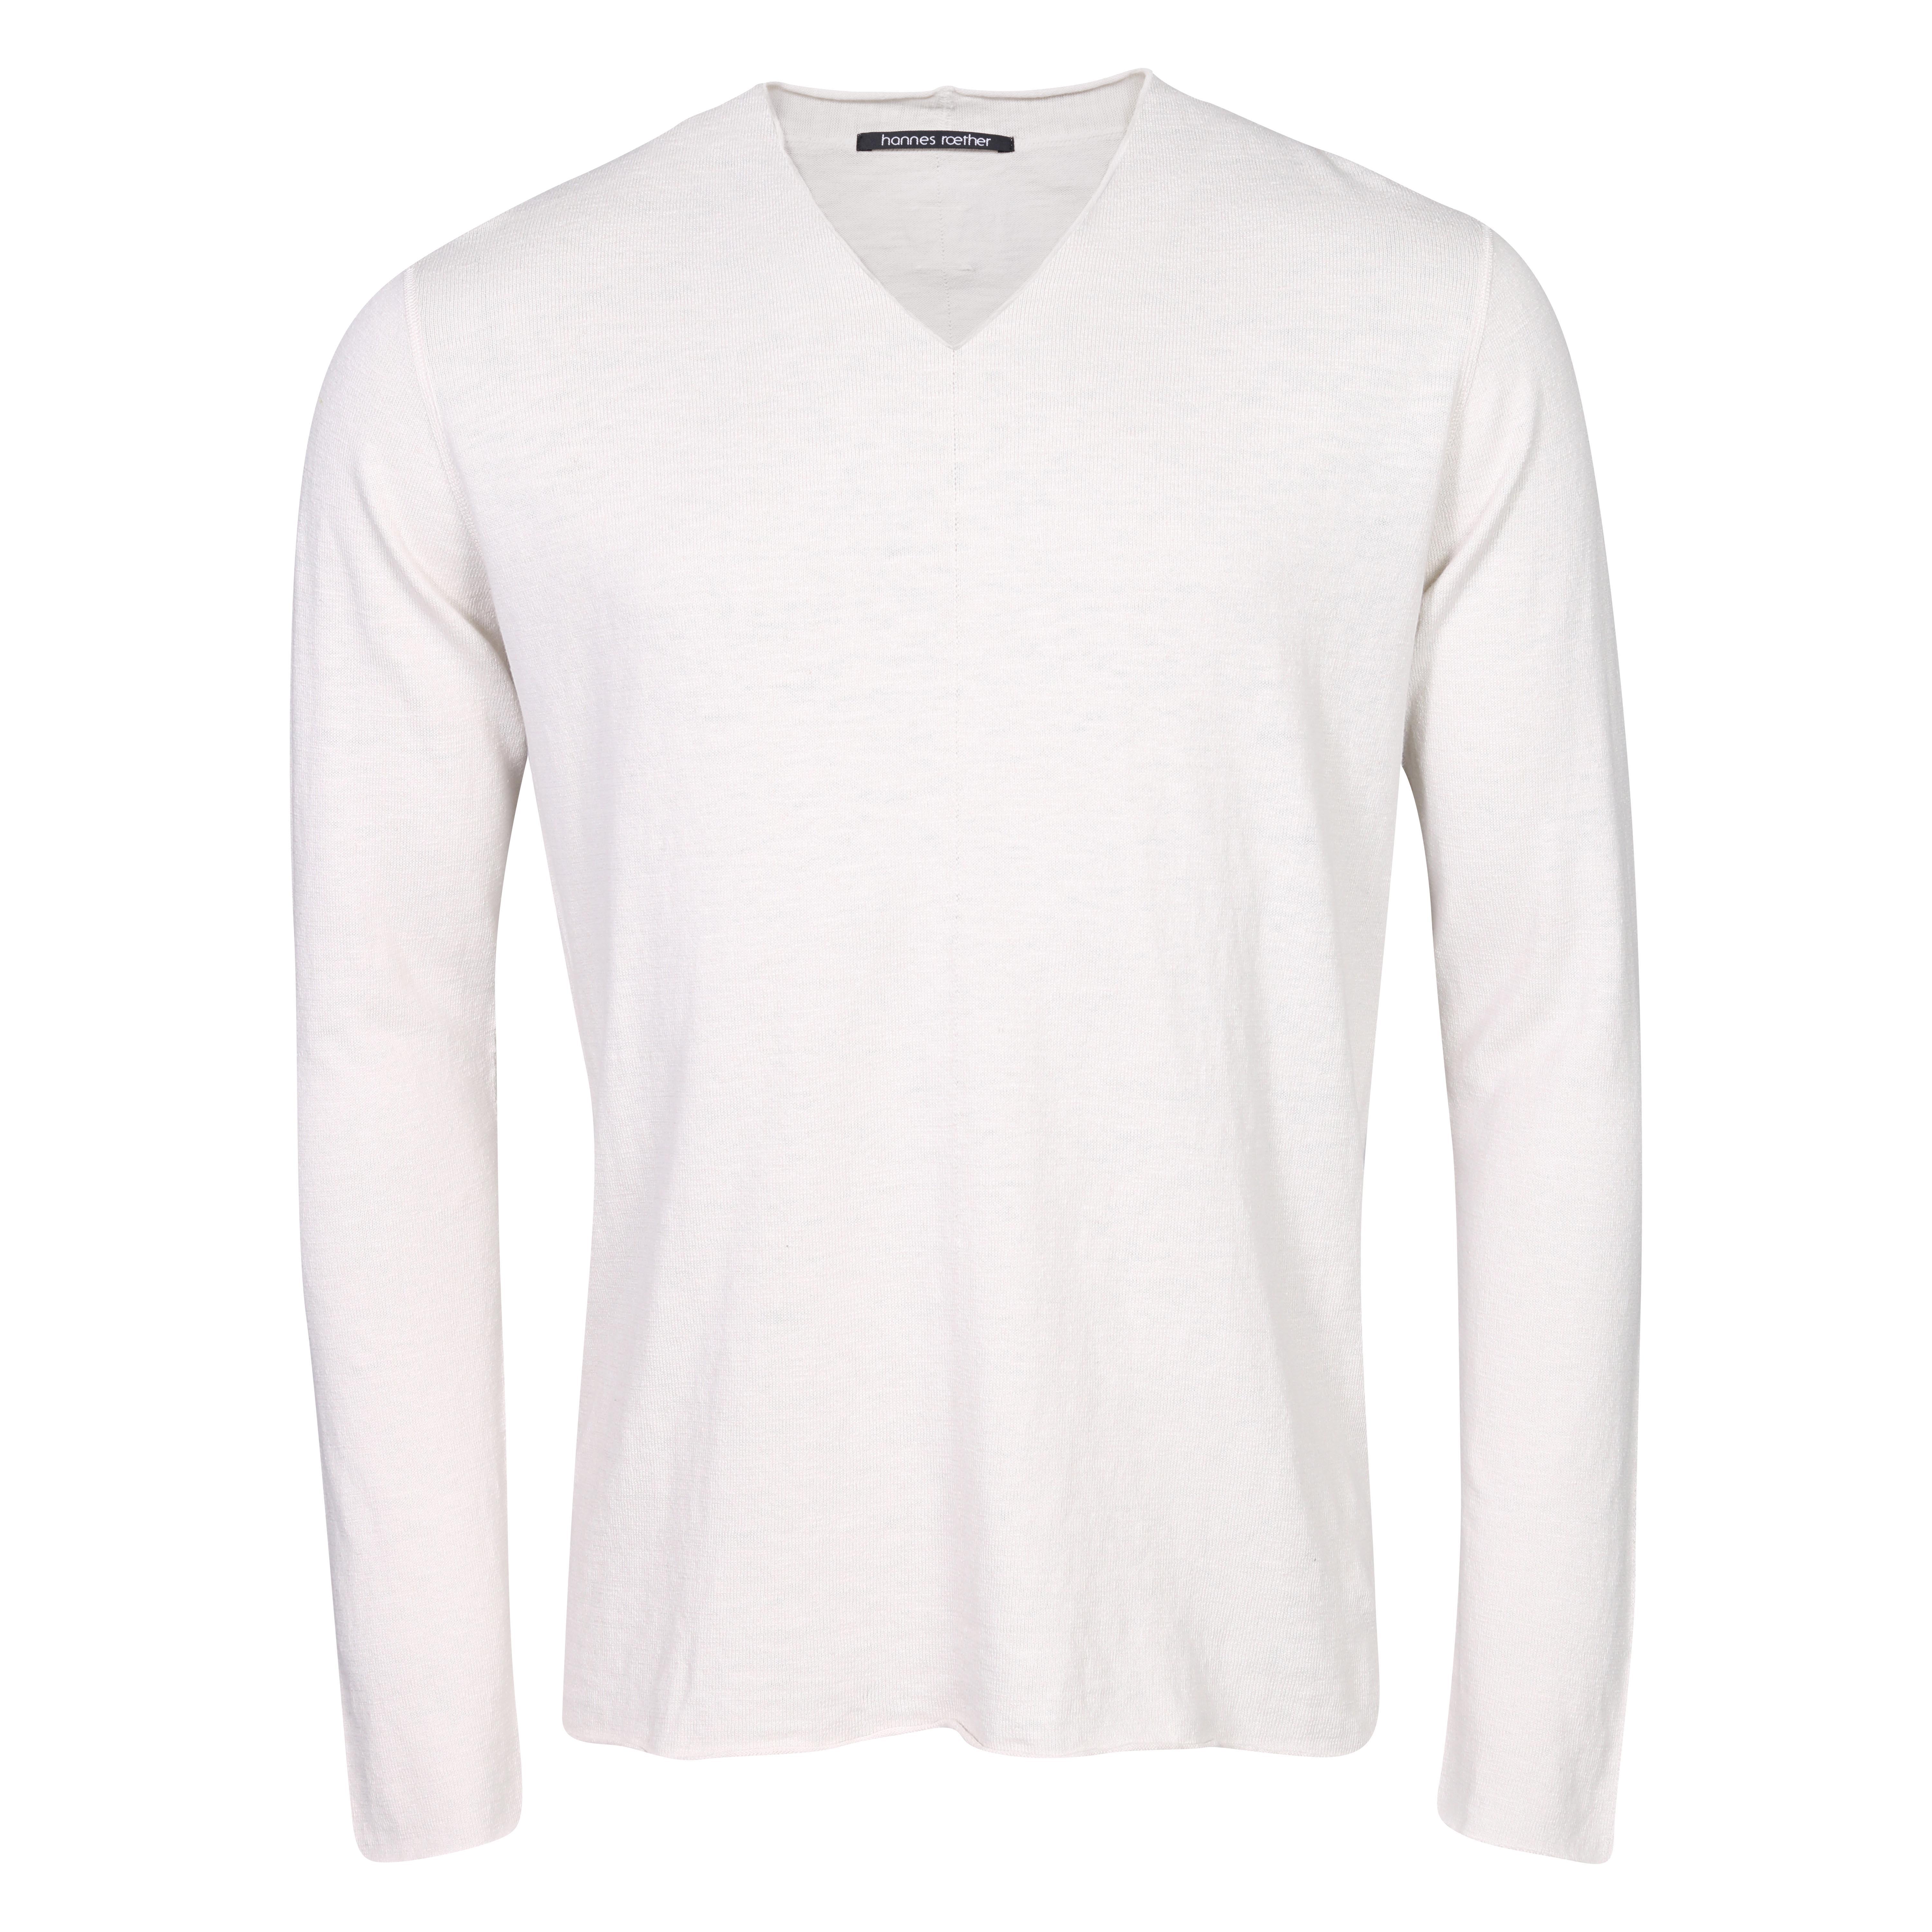 Hannes Roether V-Neck Knit Sweater in Risotto